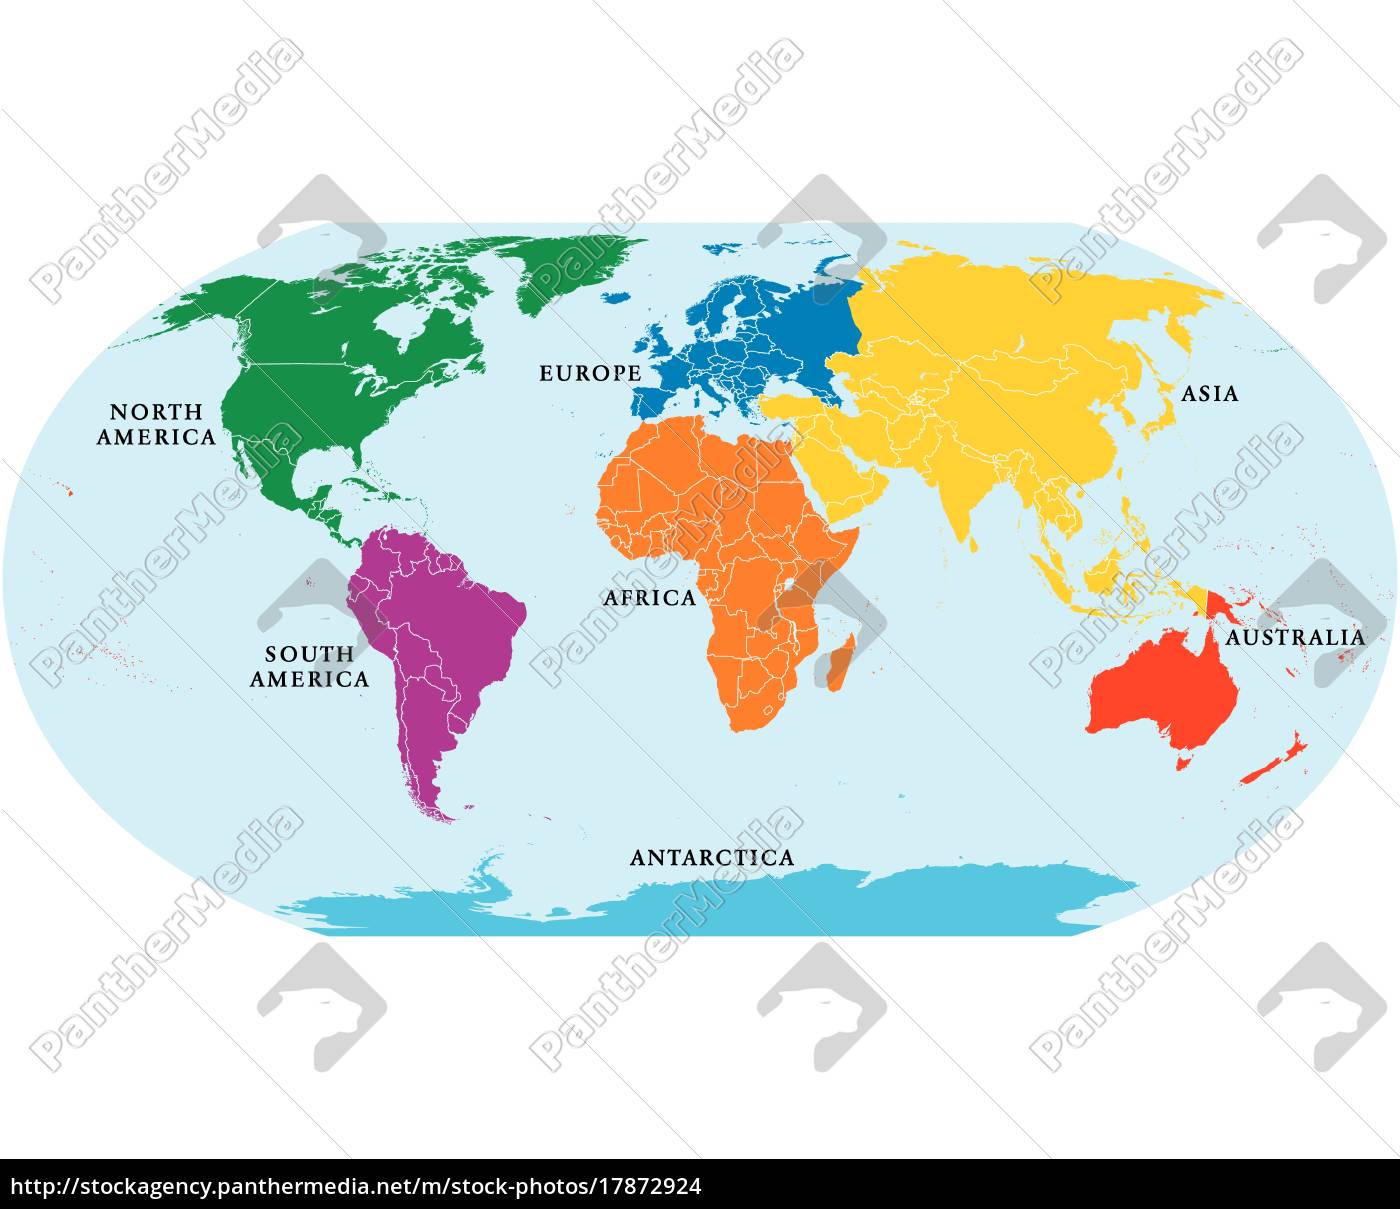 Seven Continents World Map - Royalty free photo - #17872924